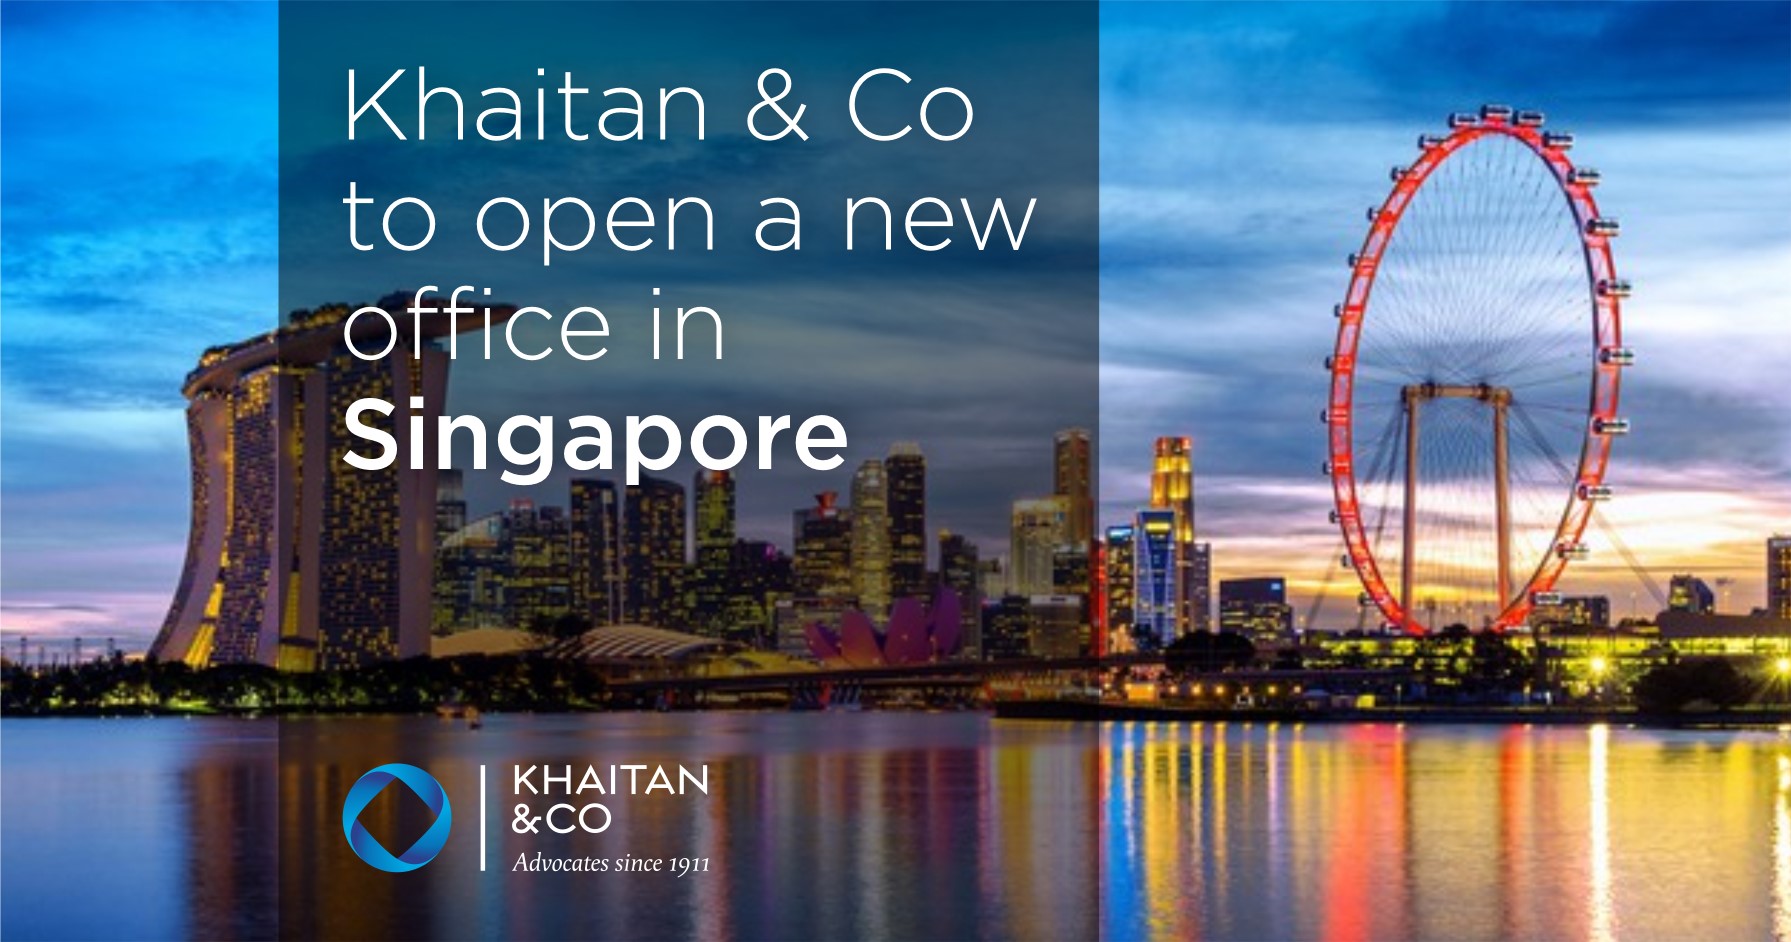 Khaitan & Co to open a new office in Singapore